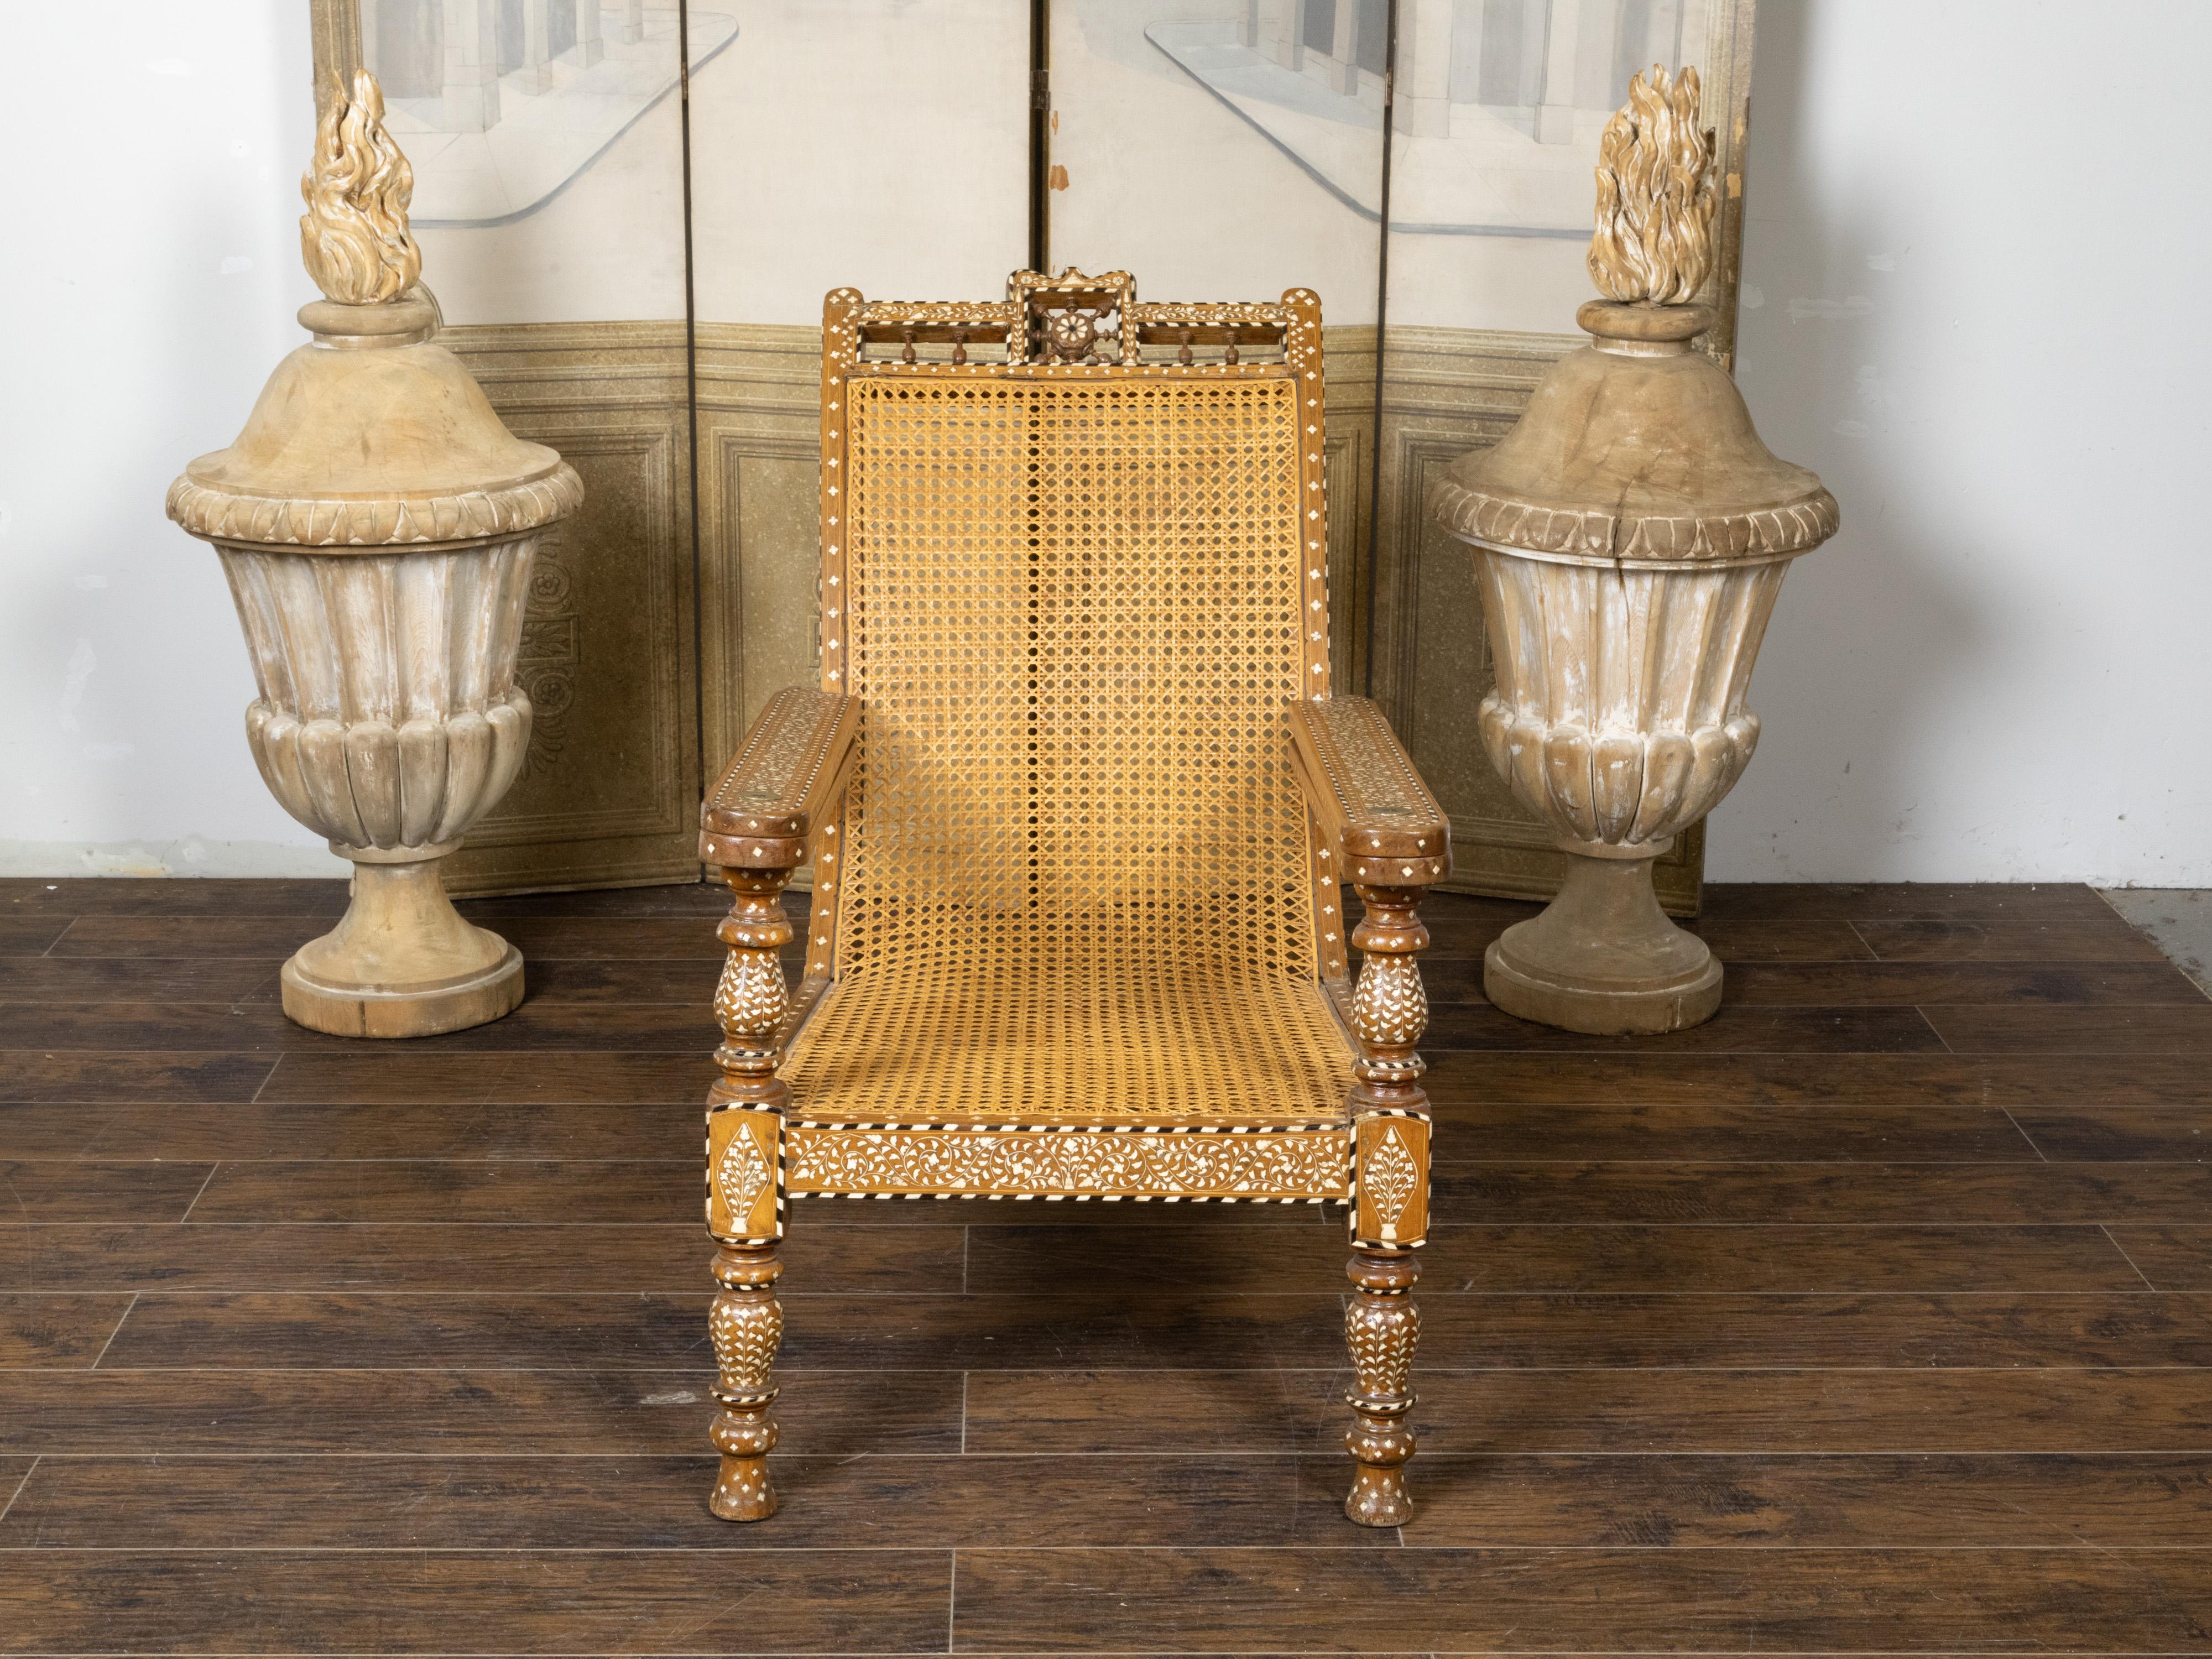 An Anglo-Indian wood and cane plantation chair from the early 20th century, with foliage-themed bone inlay and extending arms. Created during the early years of the 20th century, this Anglo Indian plantation chair features a slanted back topped with